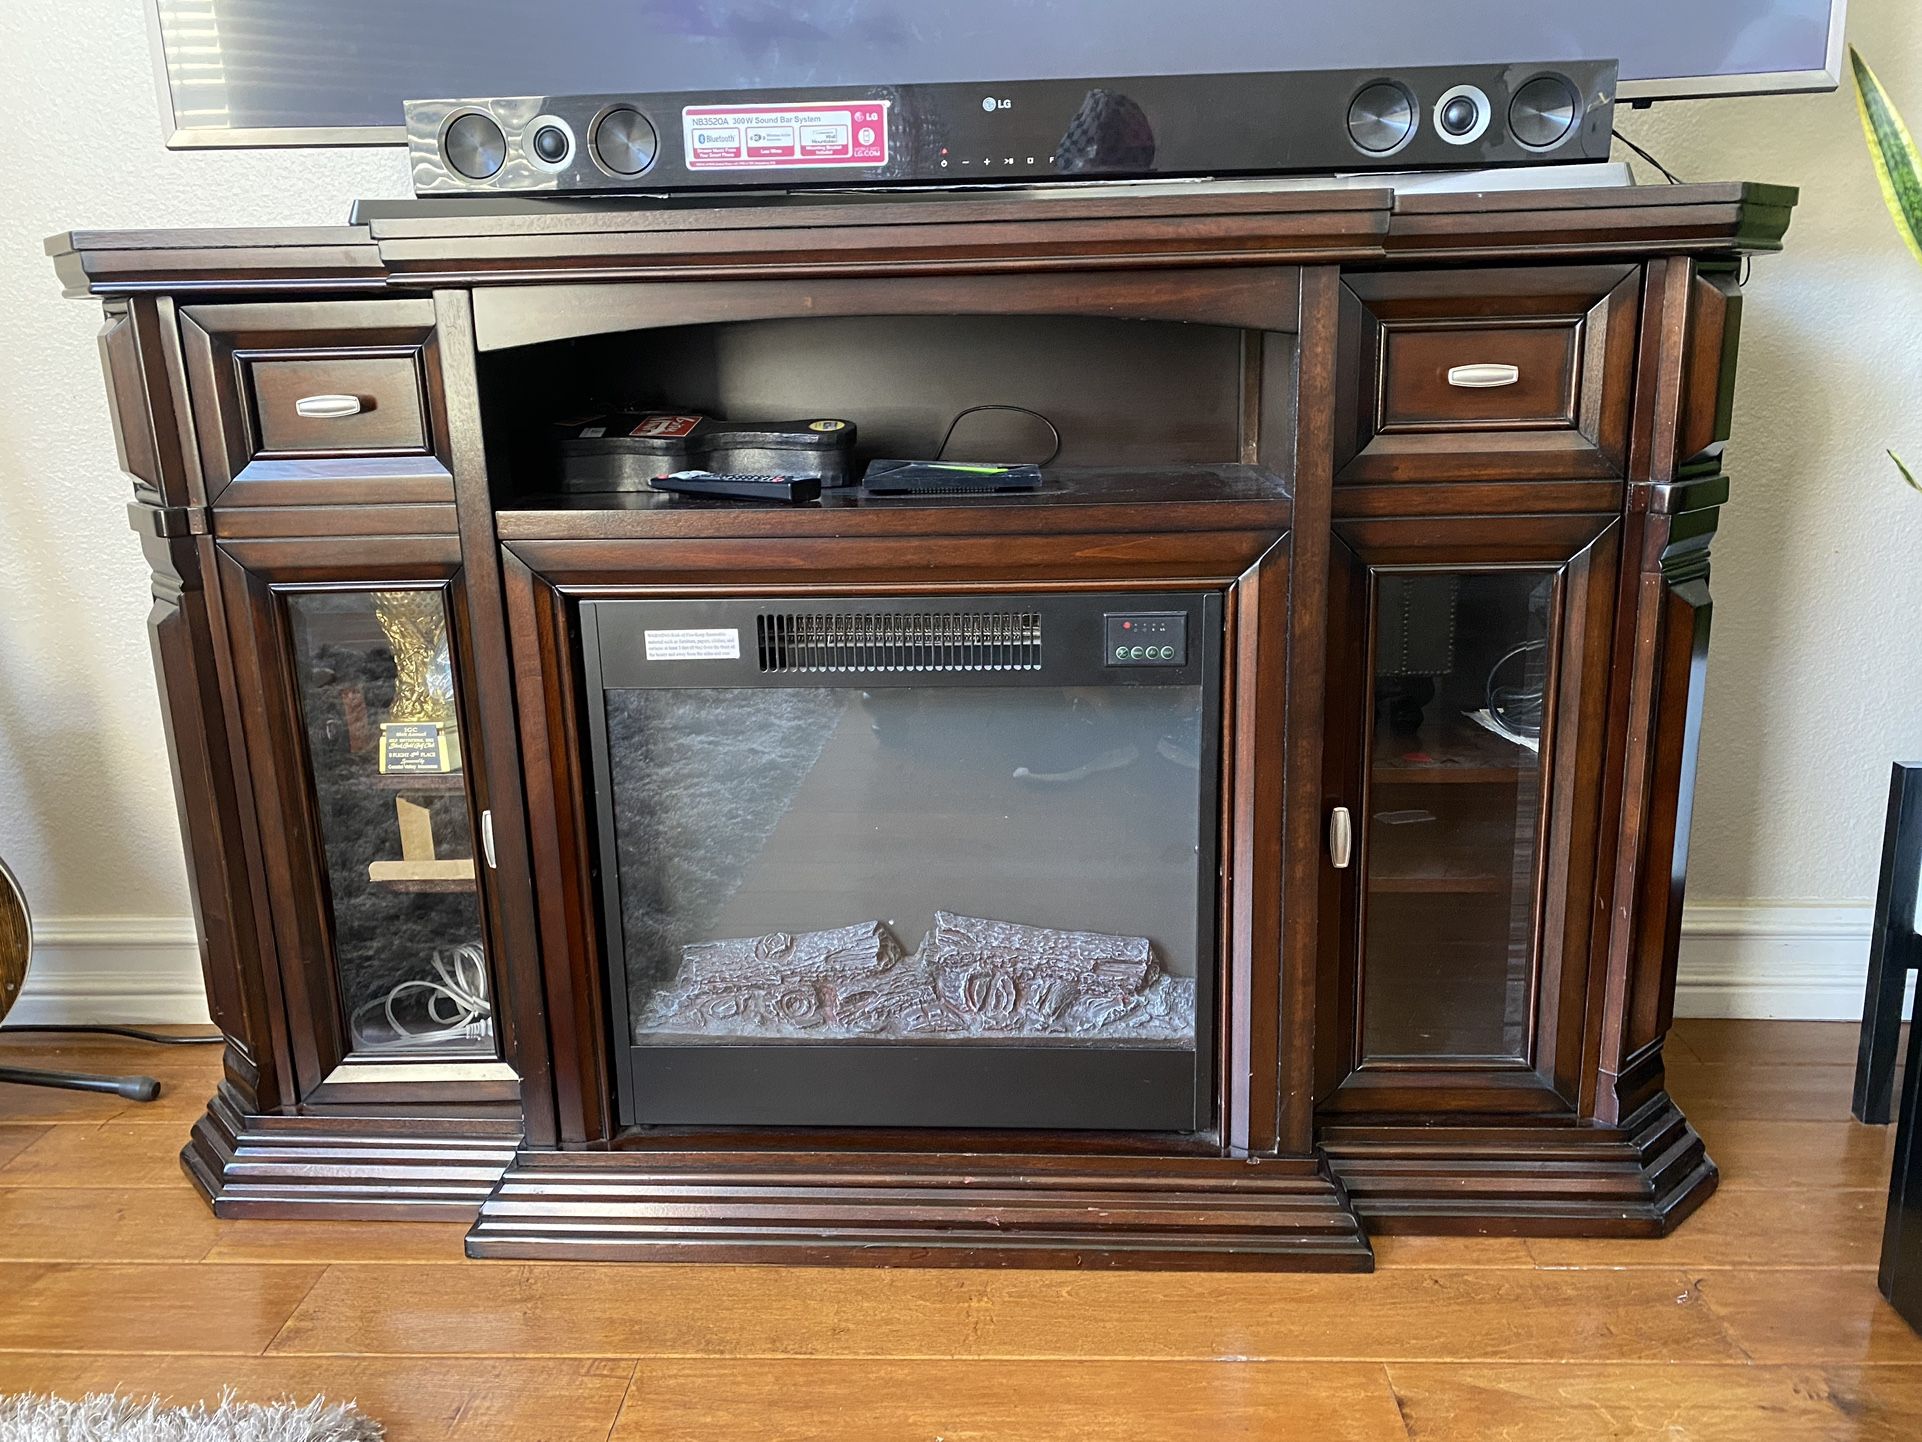 Tv Stand Heater Fire Place